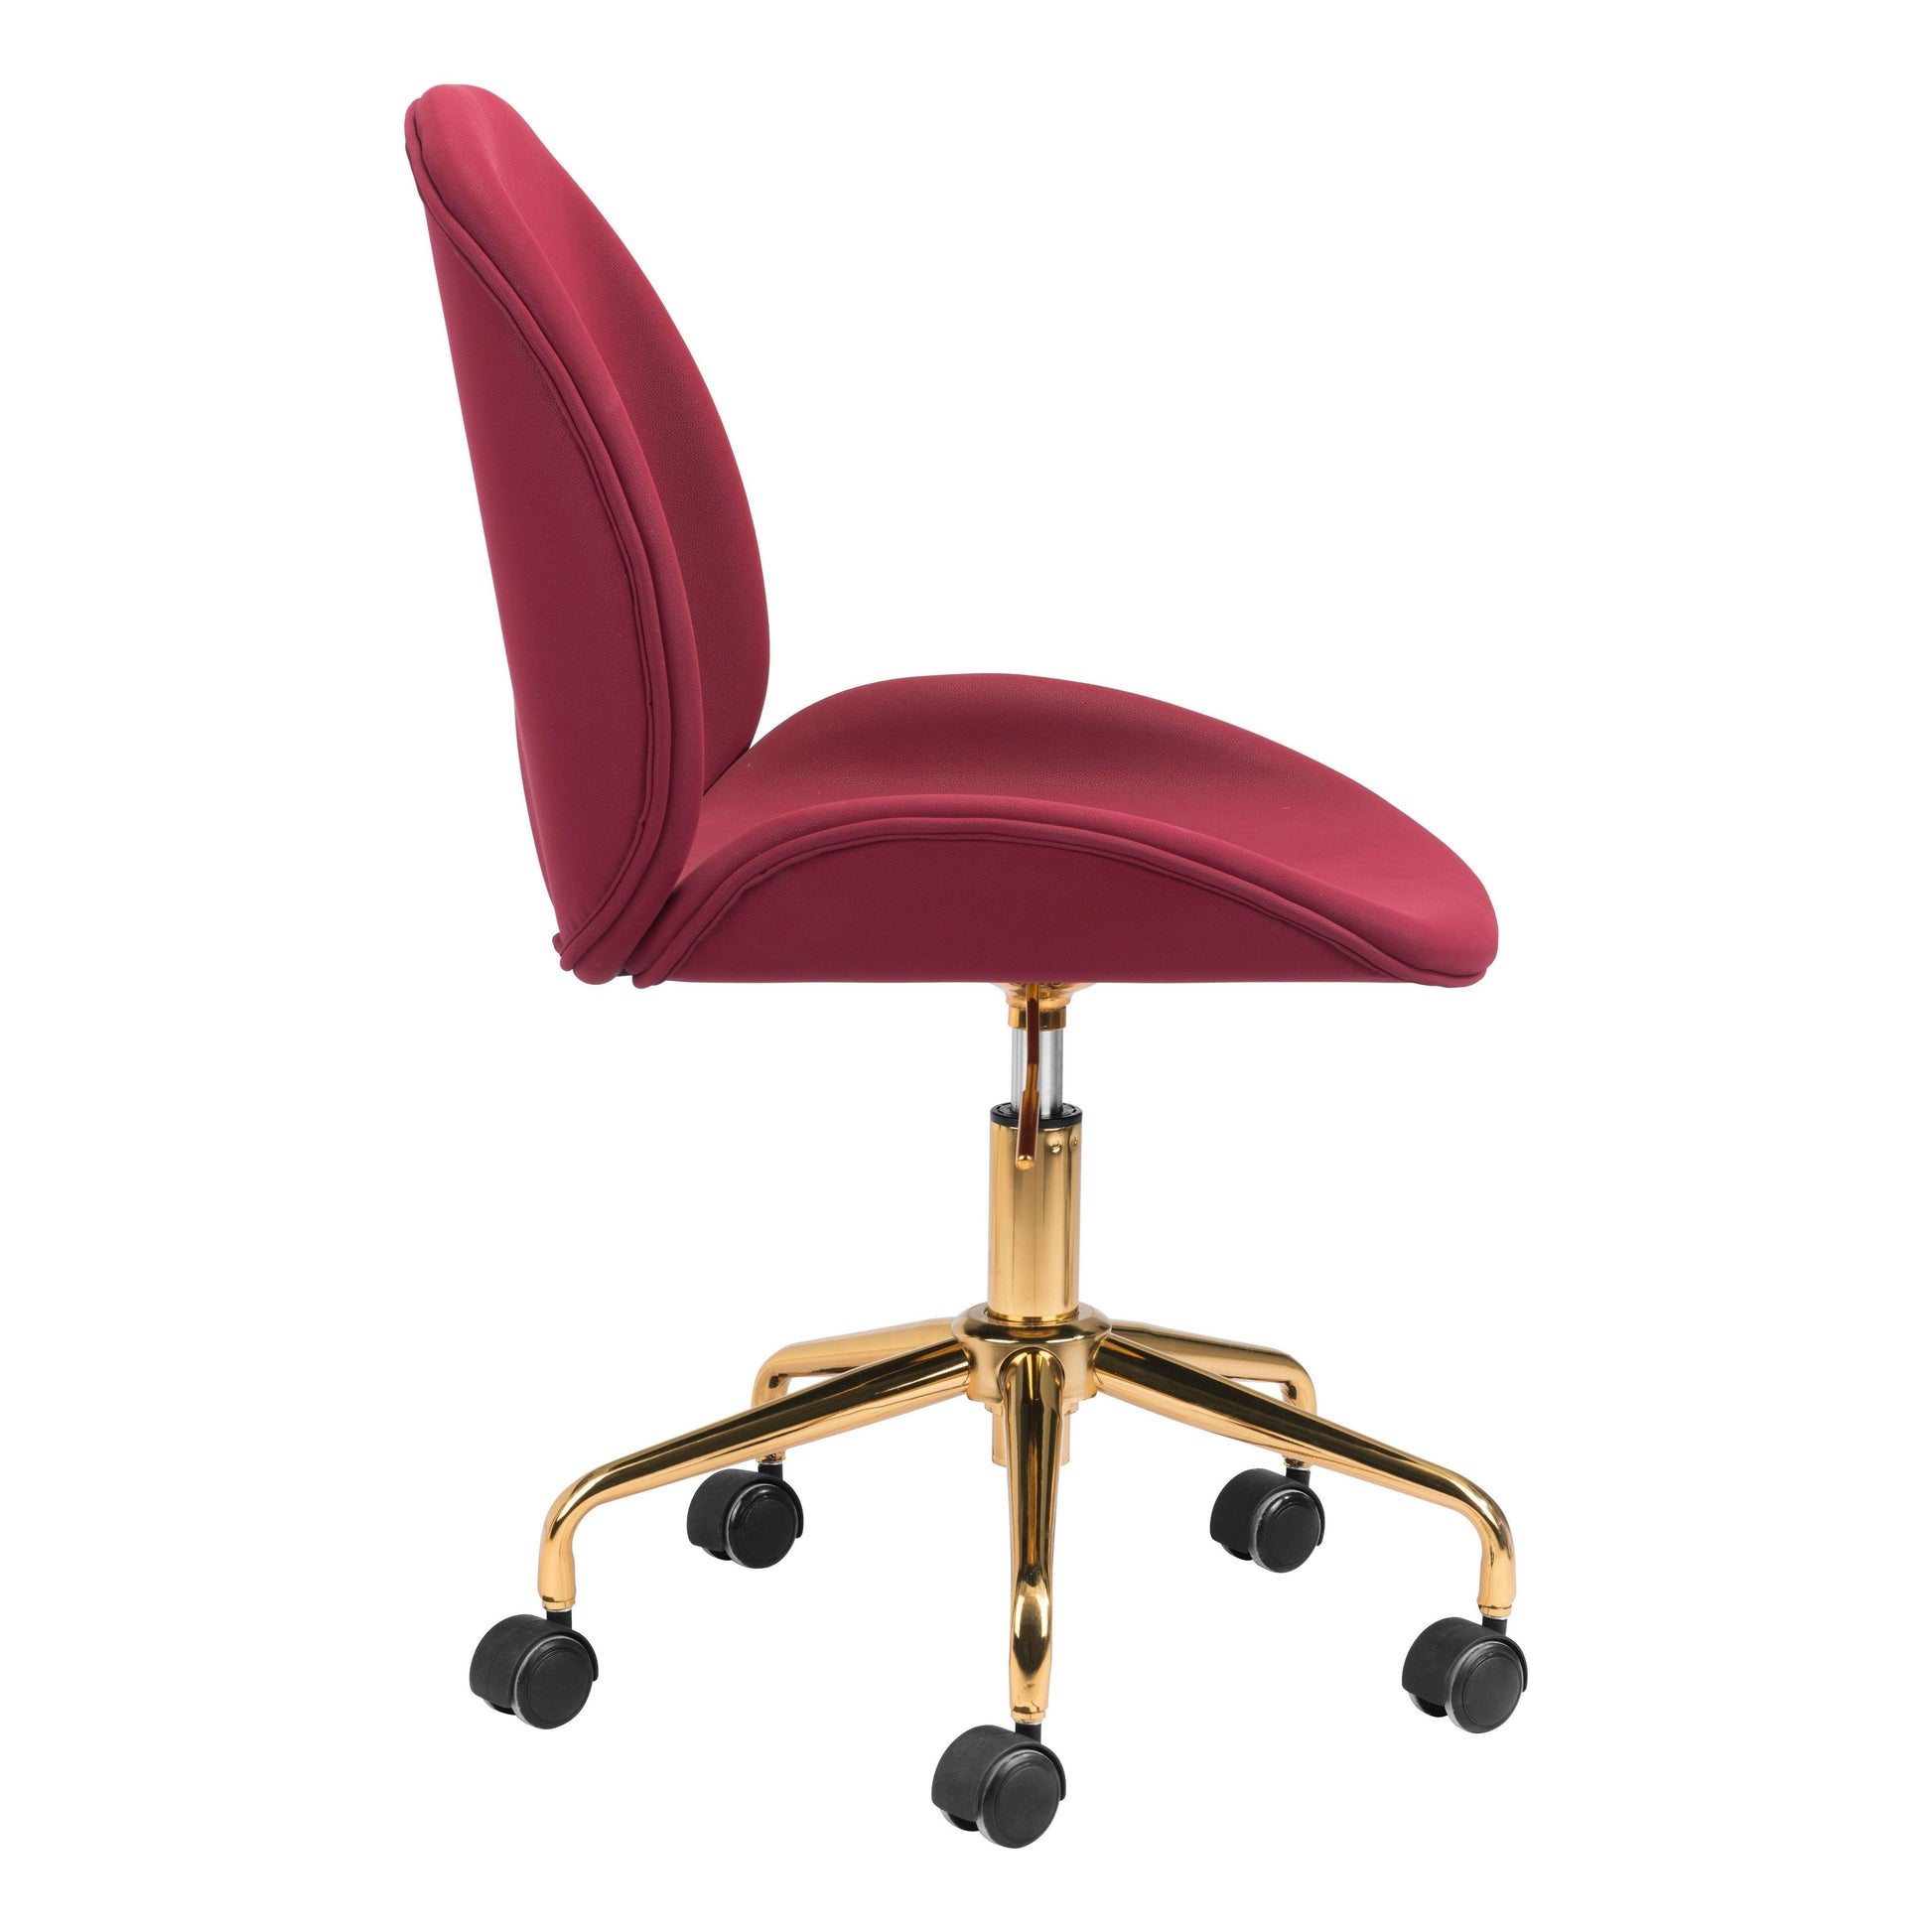 Miles Office Chair Red - Sideboards and Things Accents_Gold, Brand_Zuo Modern, Color_Gold, Color_Red, Depth_20-30, Features_Adjustable Height, Features_Swivel, Finish_Powder Coated, Height_30-40, Materials_Metal, Metal Type_Steel, Upholstery Type_Fabric Blend, Upholstery Type_Polyester, Width_20-30